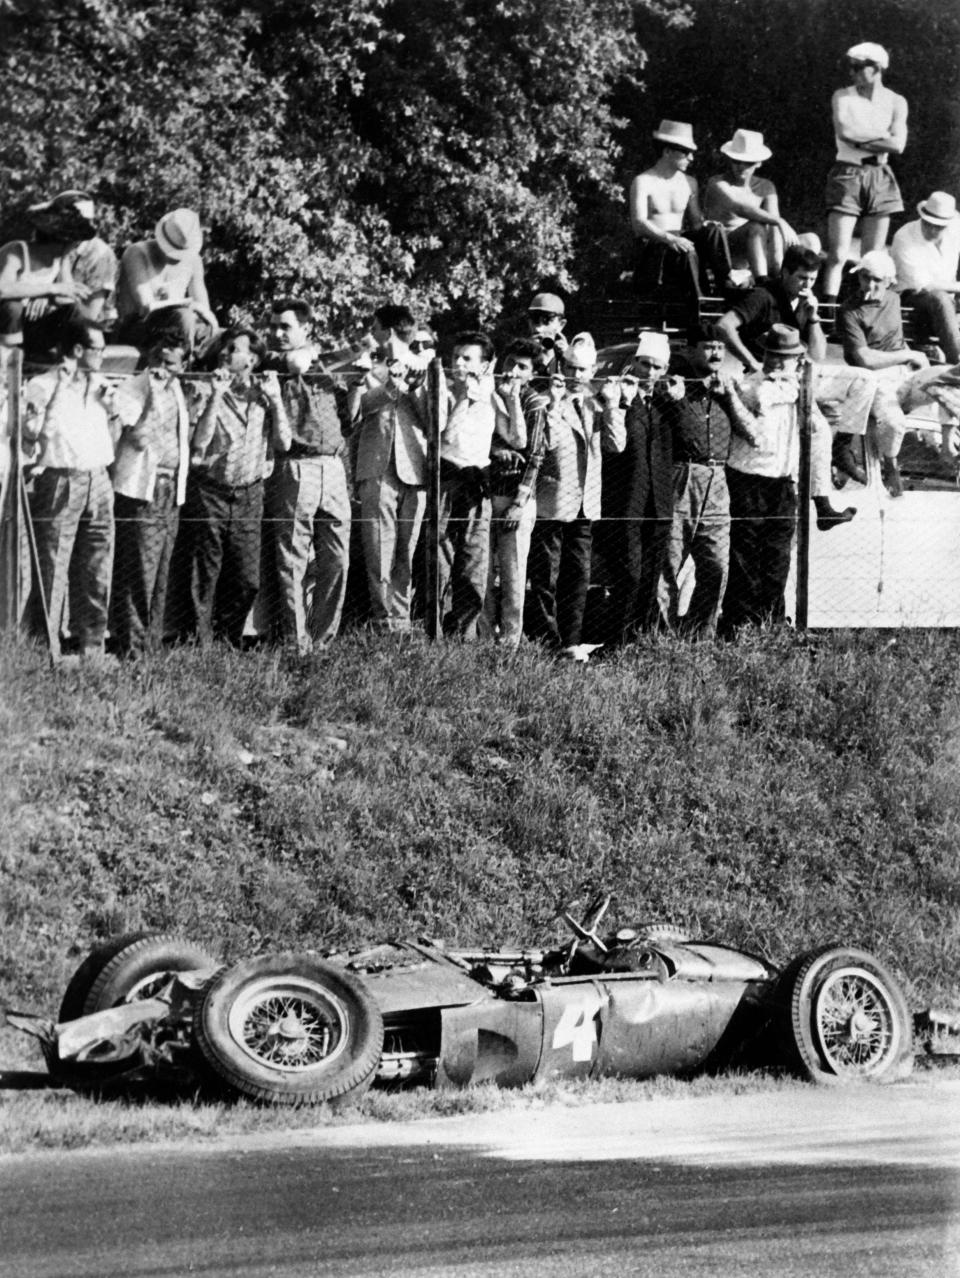 Spectators look at the Ferrari of German driver Wolfgang von Trips after it crashed into the crowd killing 15 people during the Italian Formula One Grand Prix in 1961